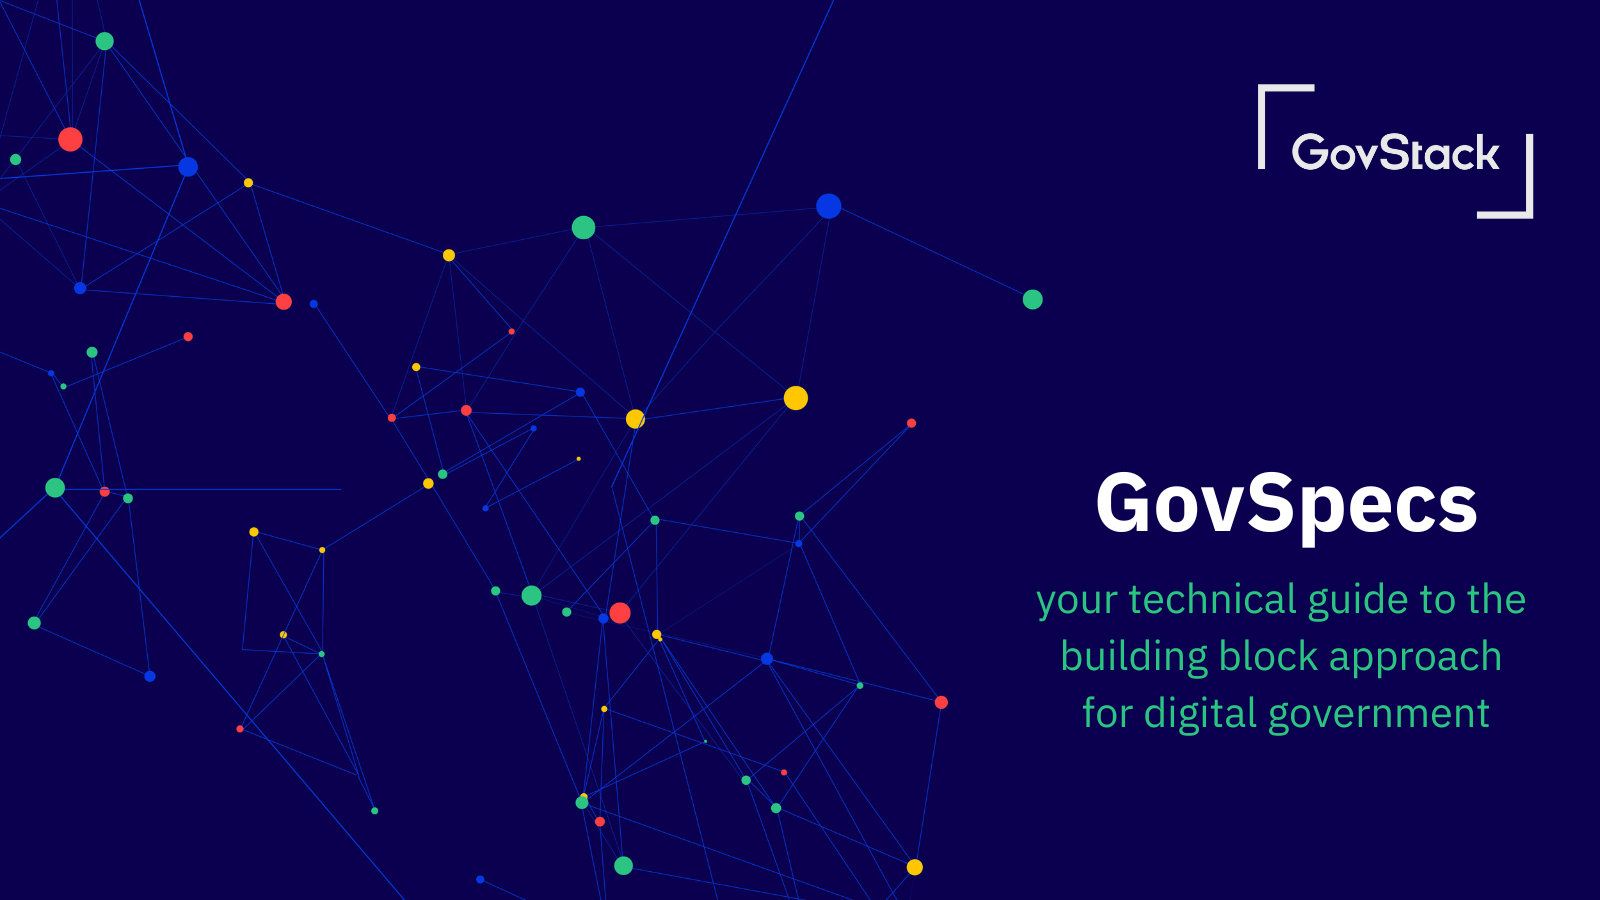 New GovSpecs Publication Expands the Toolkit for Digital Government Services